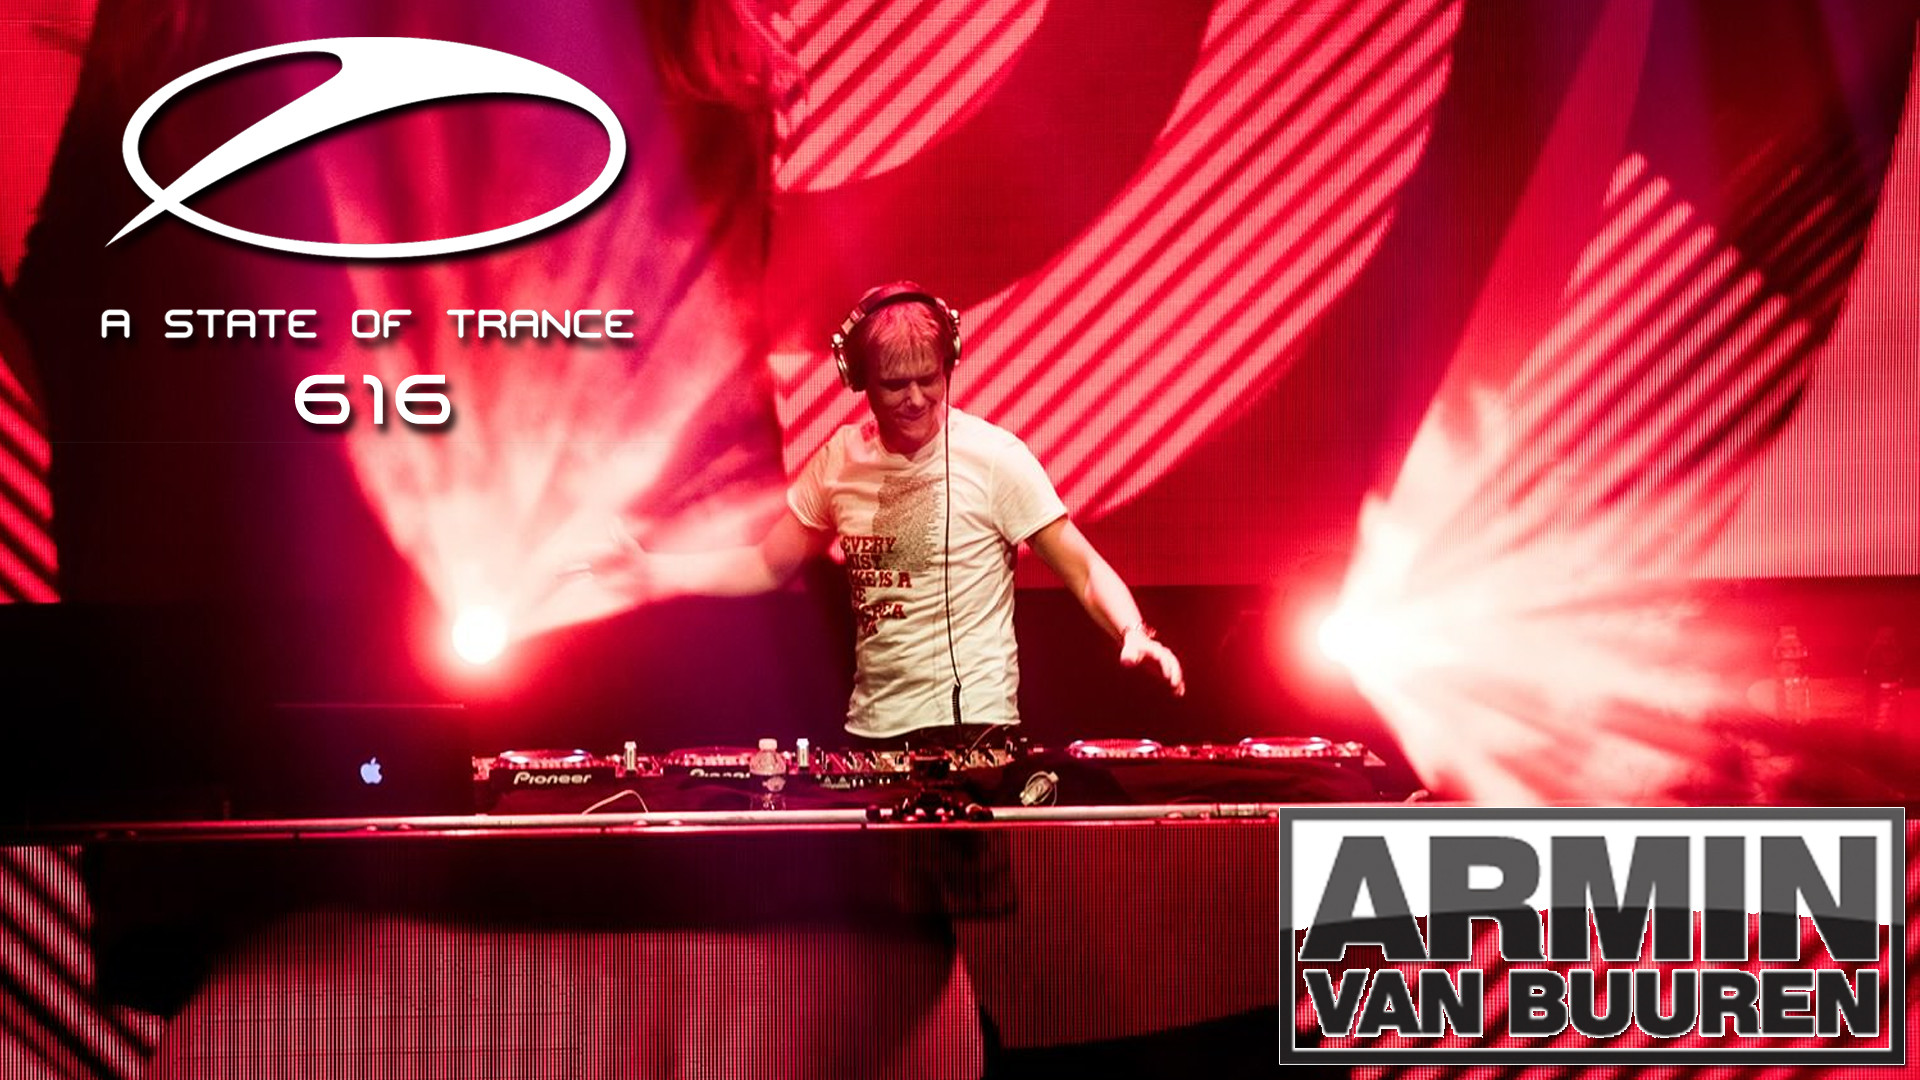 1920x1080 A State Of Trance 616 (06.06.2013) with Armin van Buuren | TranceAttack